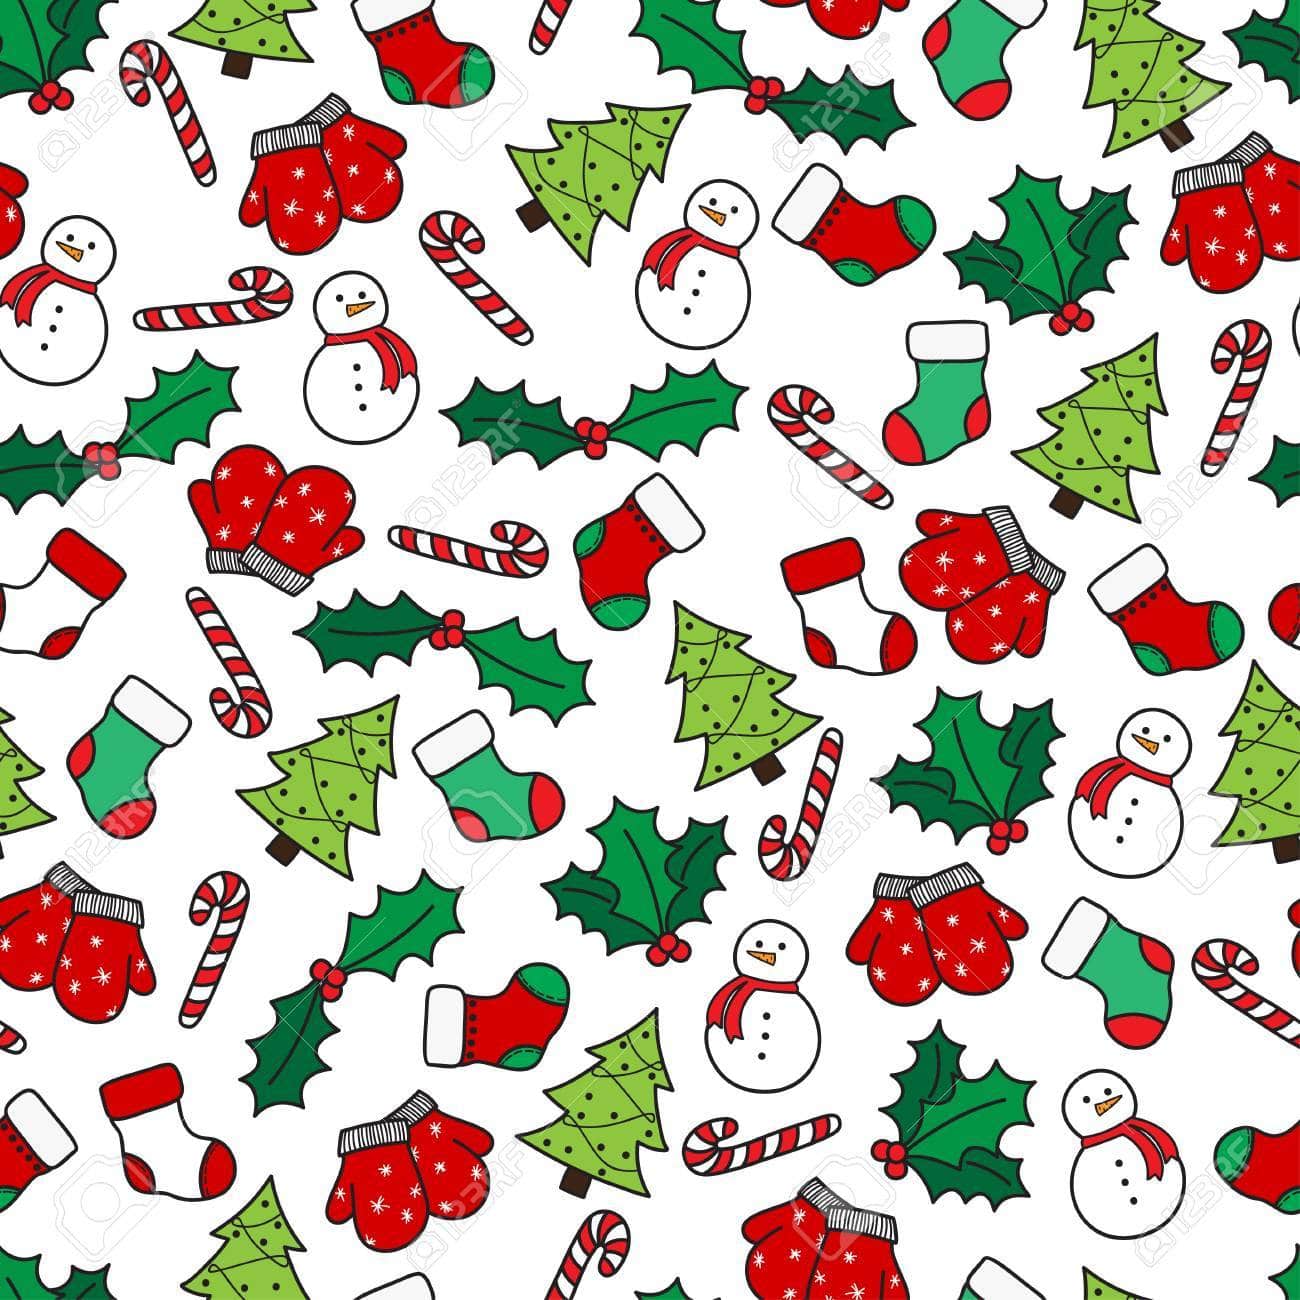 Background Candy Cane Wallpaper